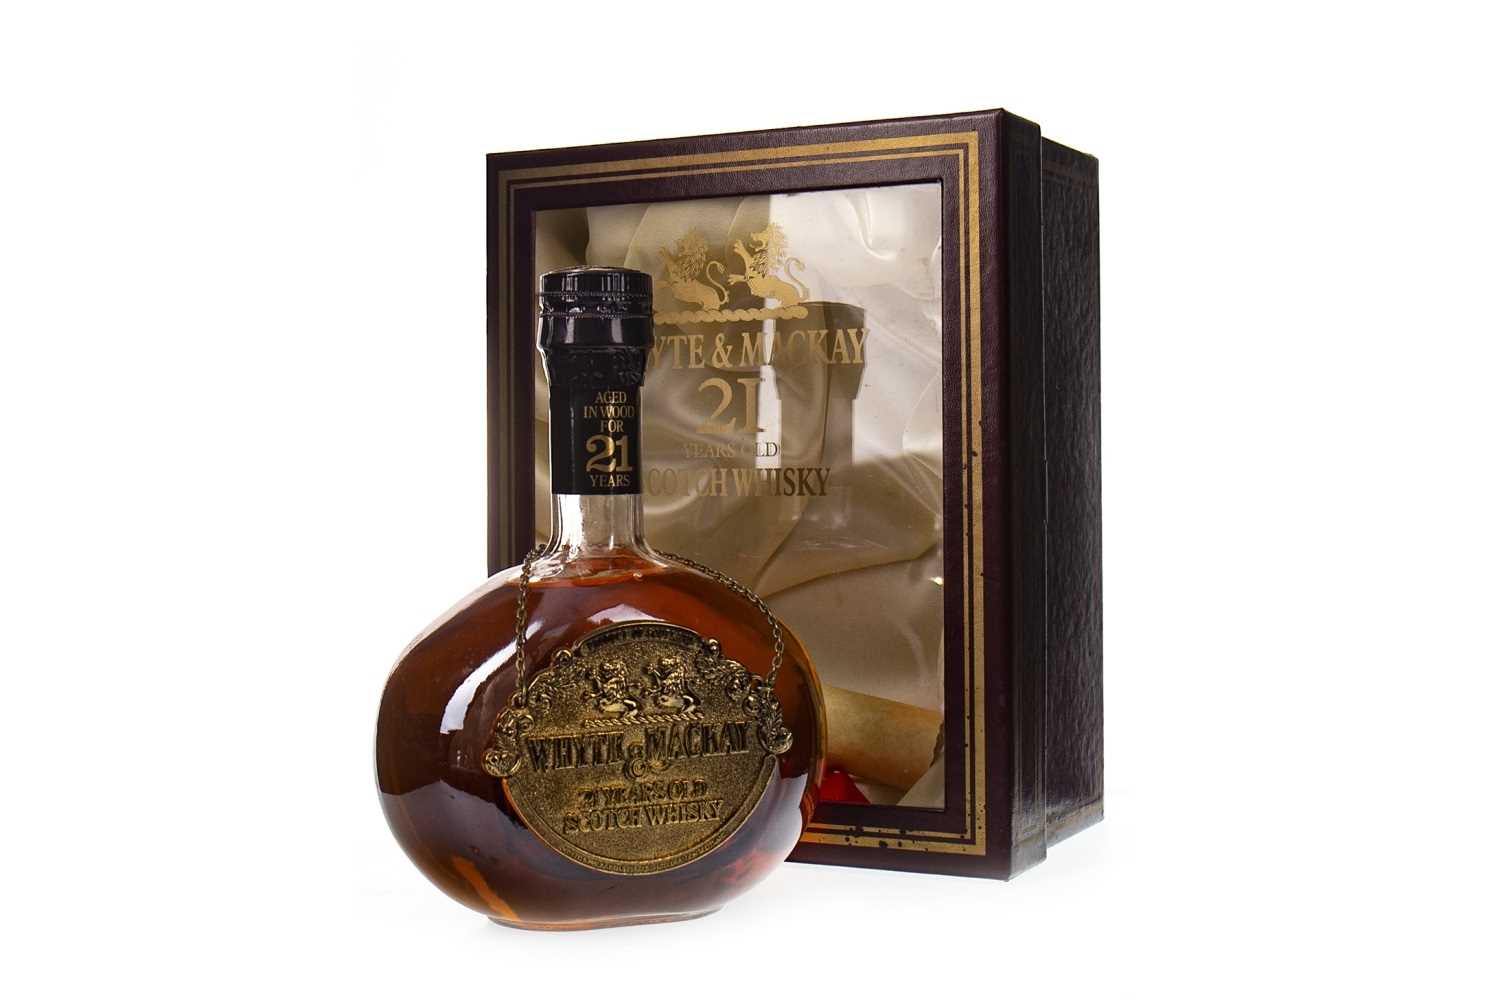 Lot 468 - WHYTE & MACKAY AGED 21 YEARS